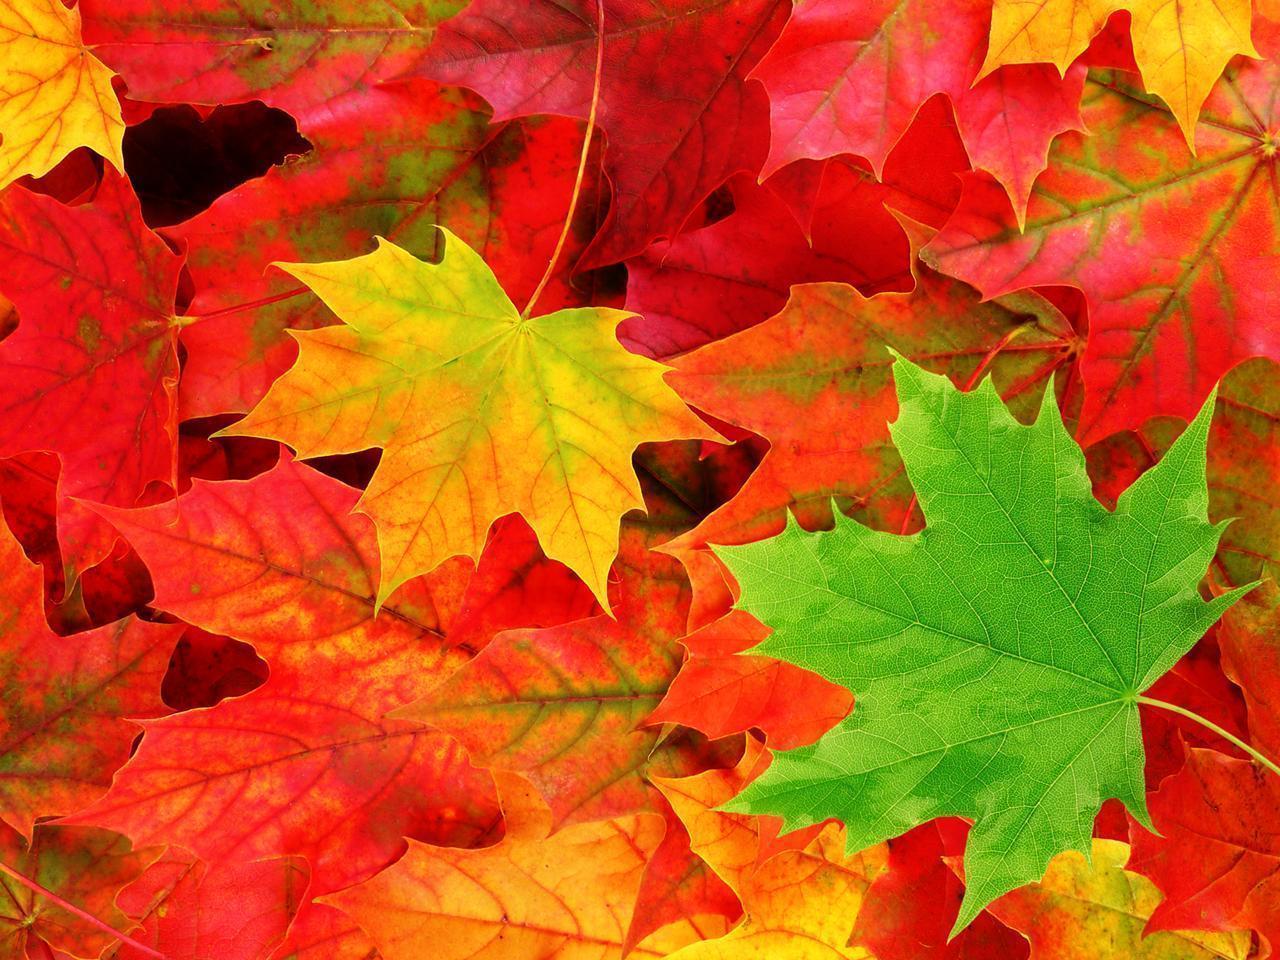 Fall Leaves Nature High Resolution Image Desktop Background Free